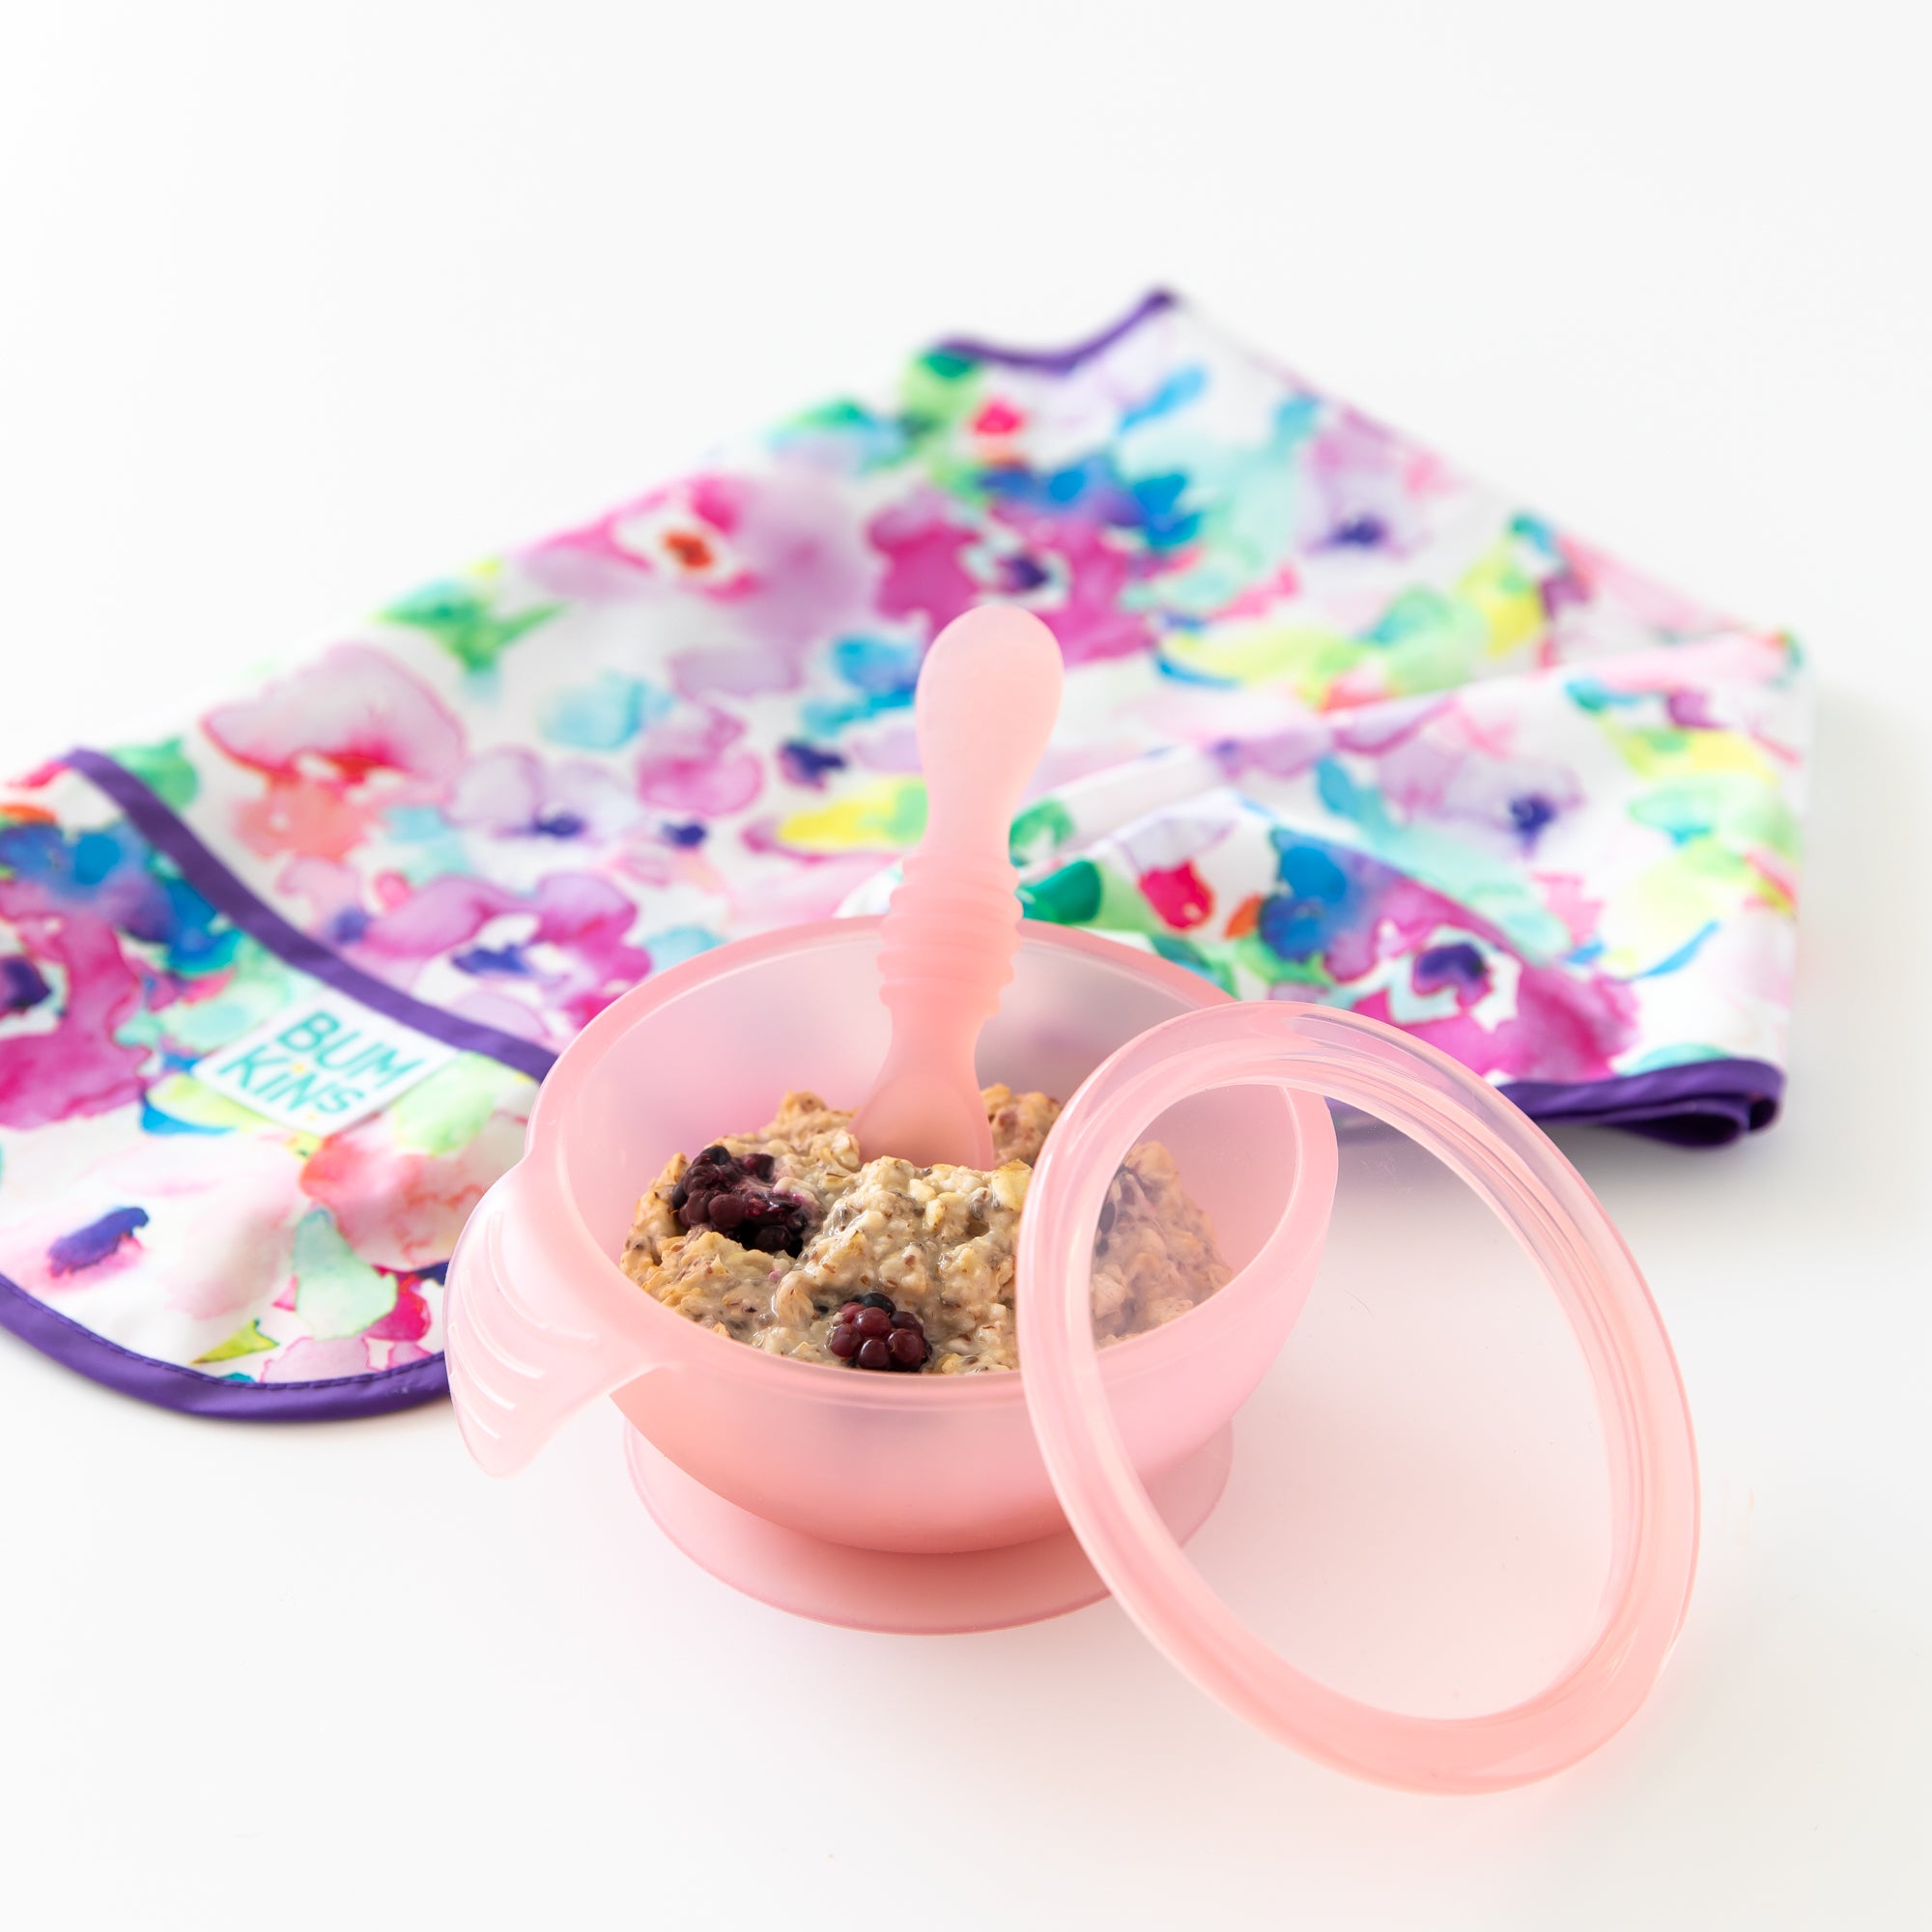 Silicone First Feeding Set: Pink Jelly